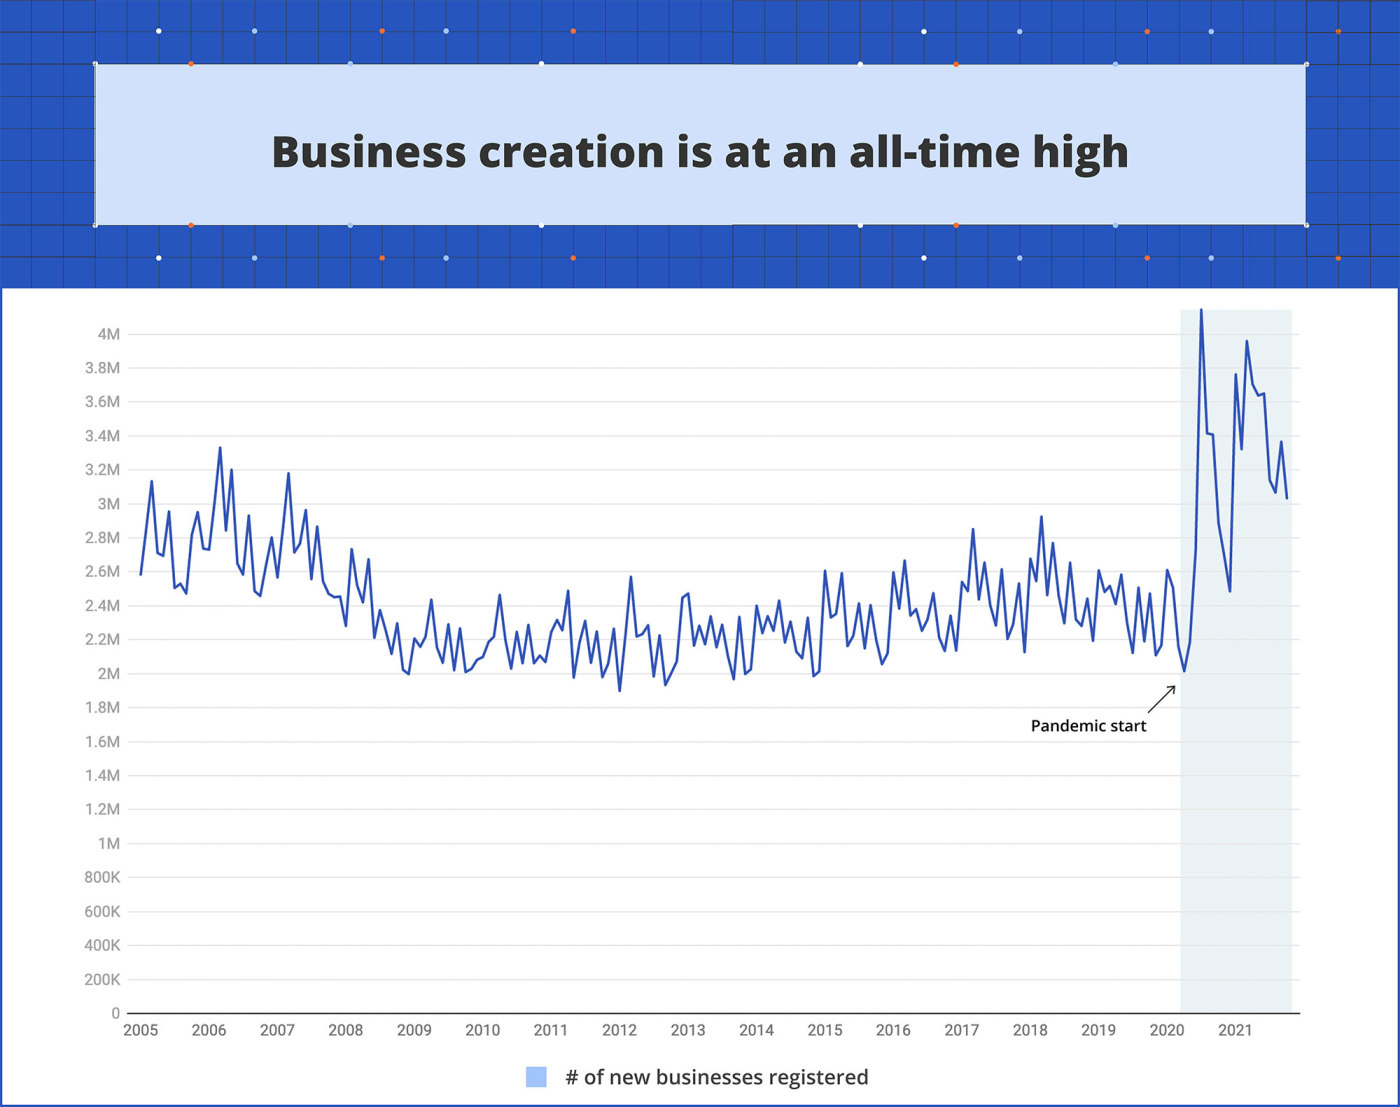 A line graph showing that the number of new businesses registered spiked after the pandemic and remains high